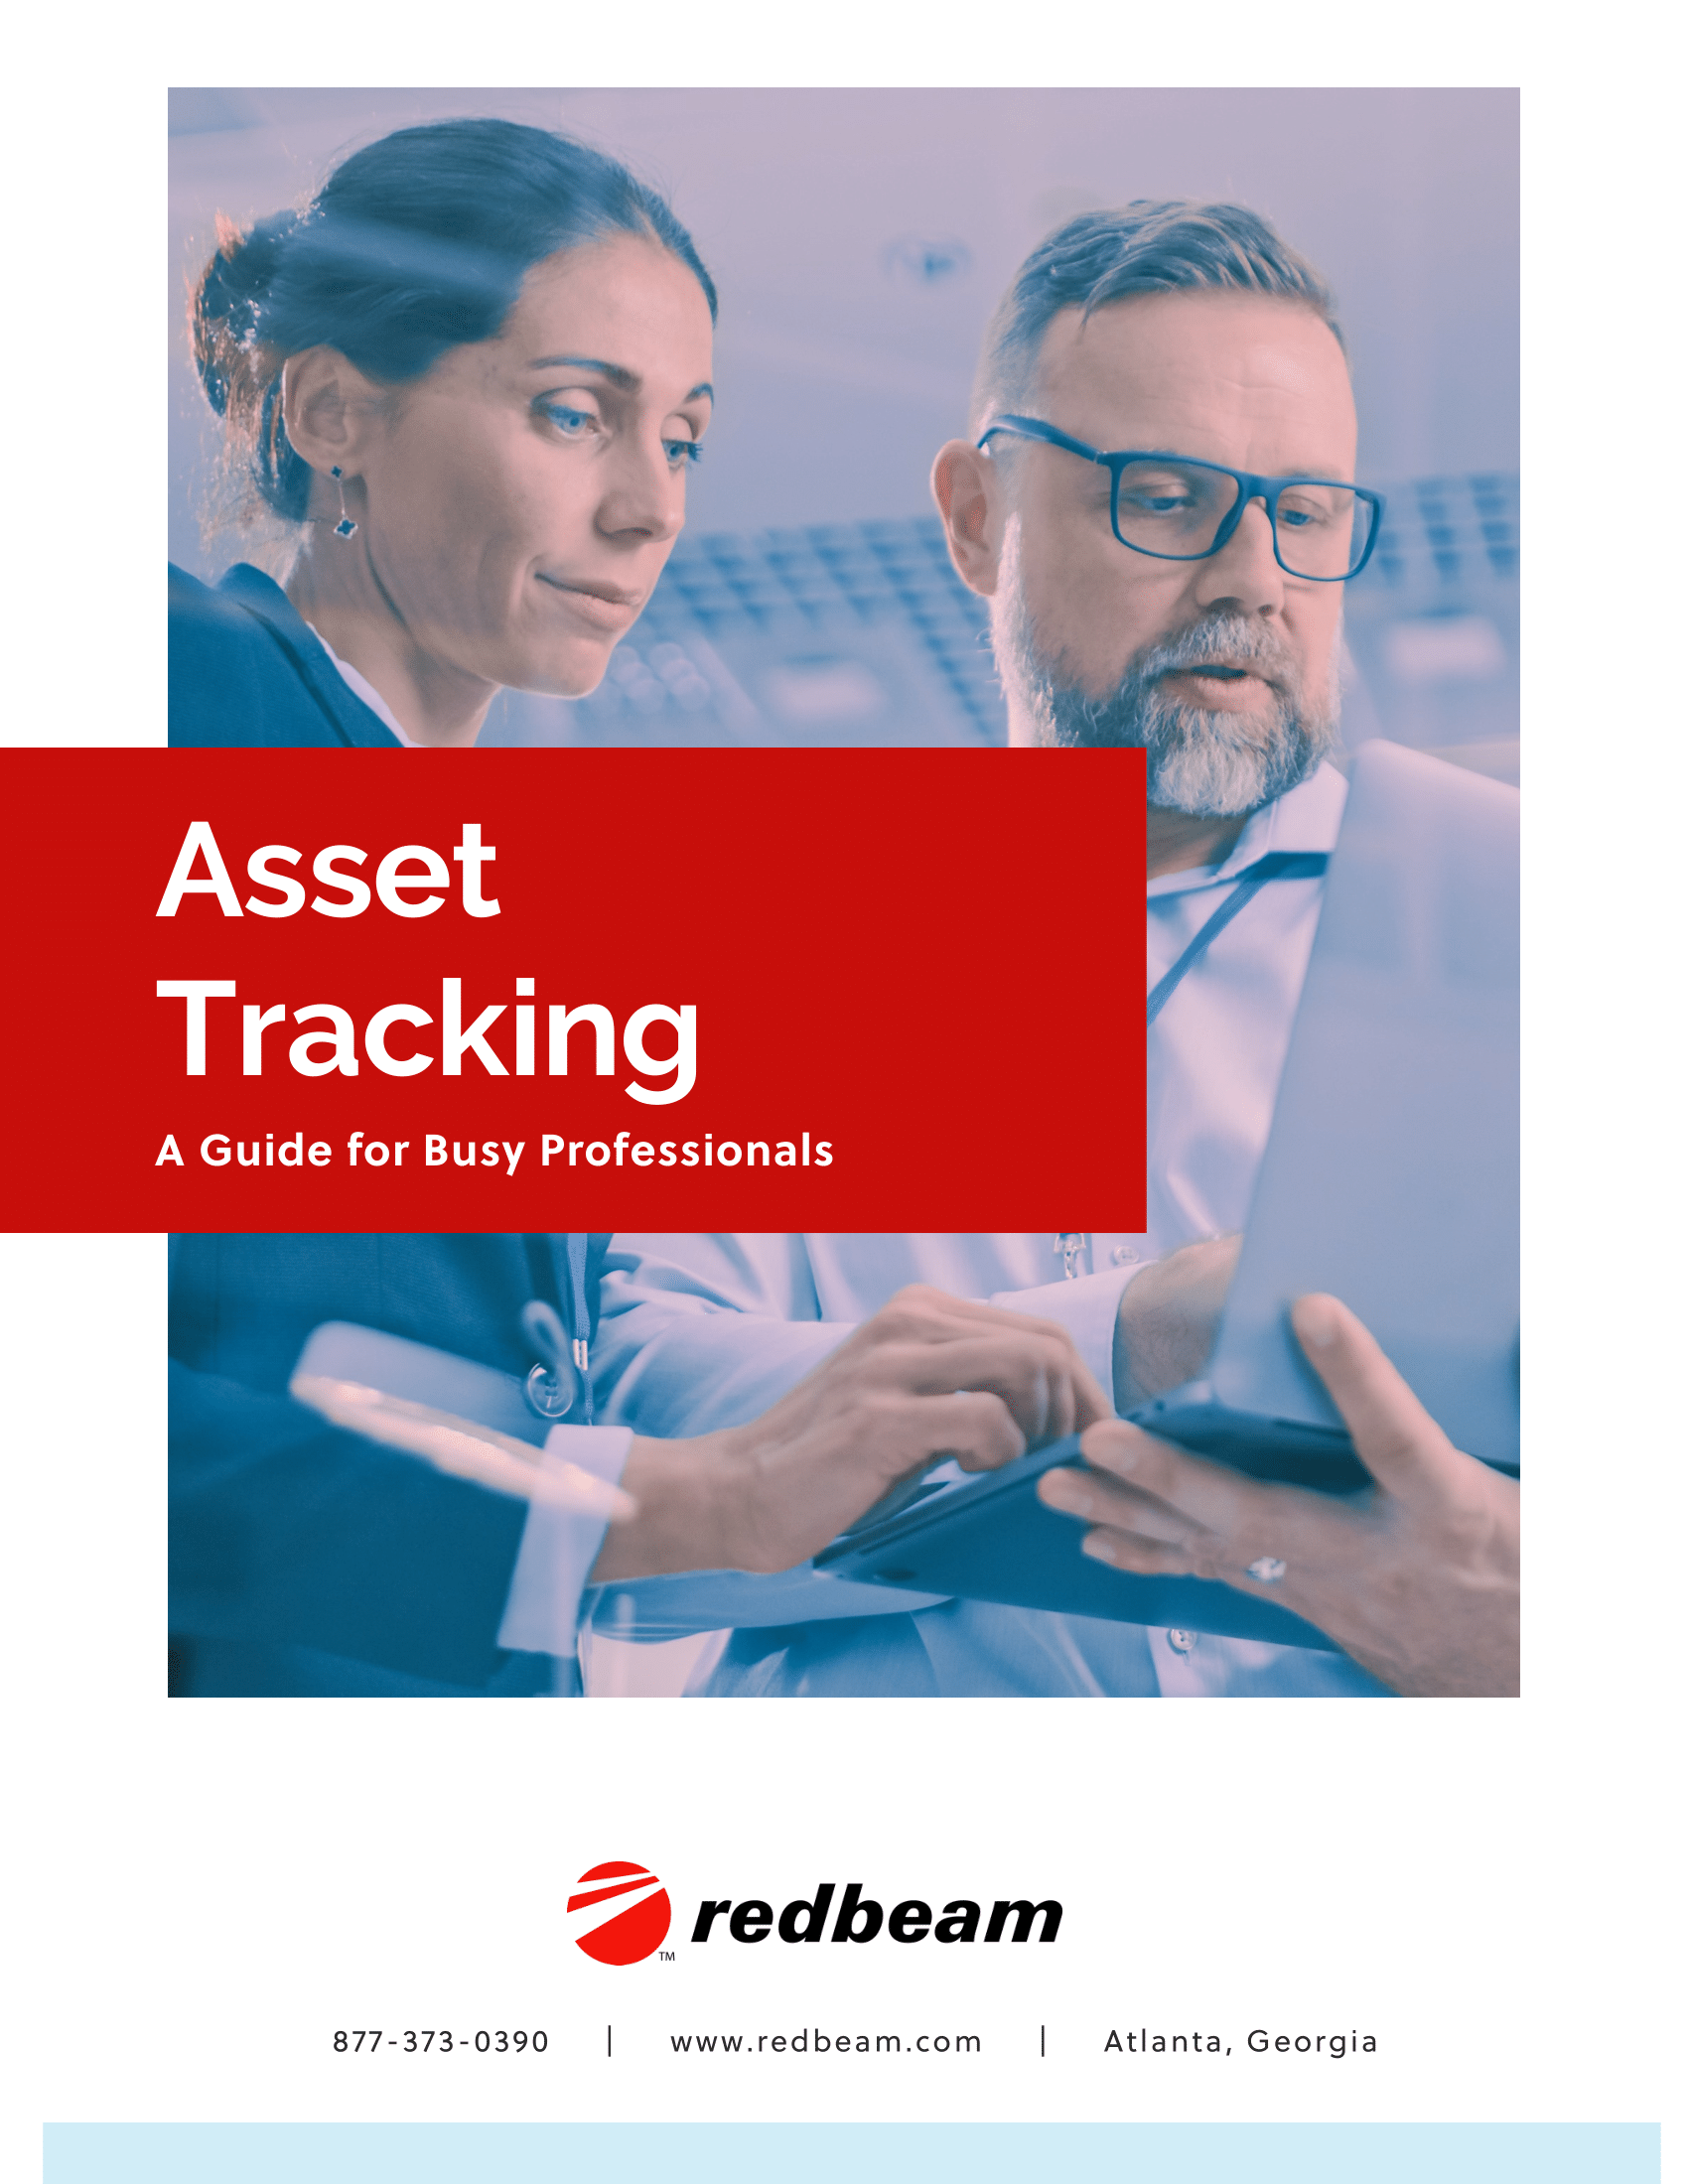 Asset Tracking Guide